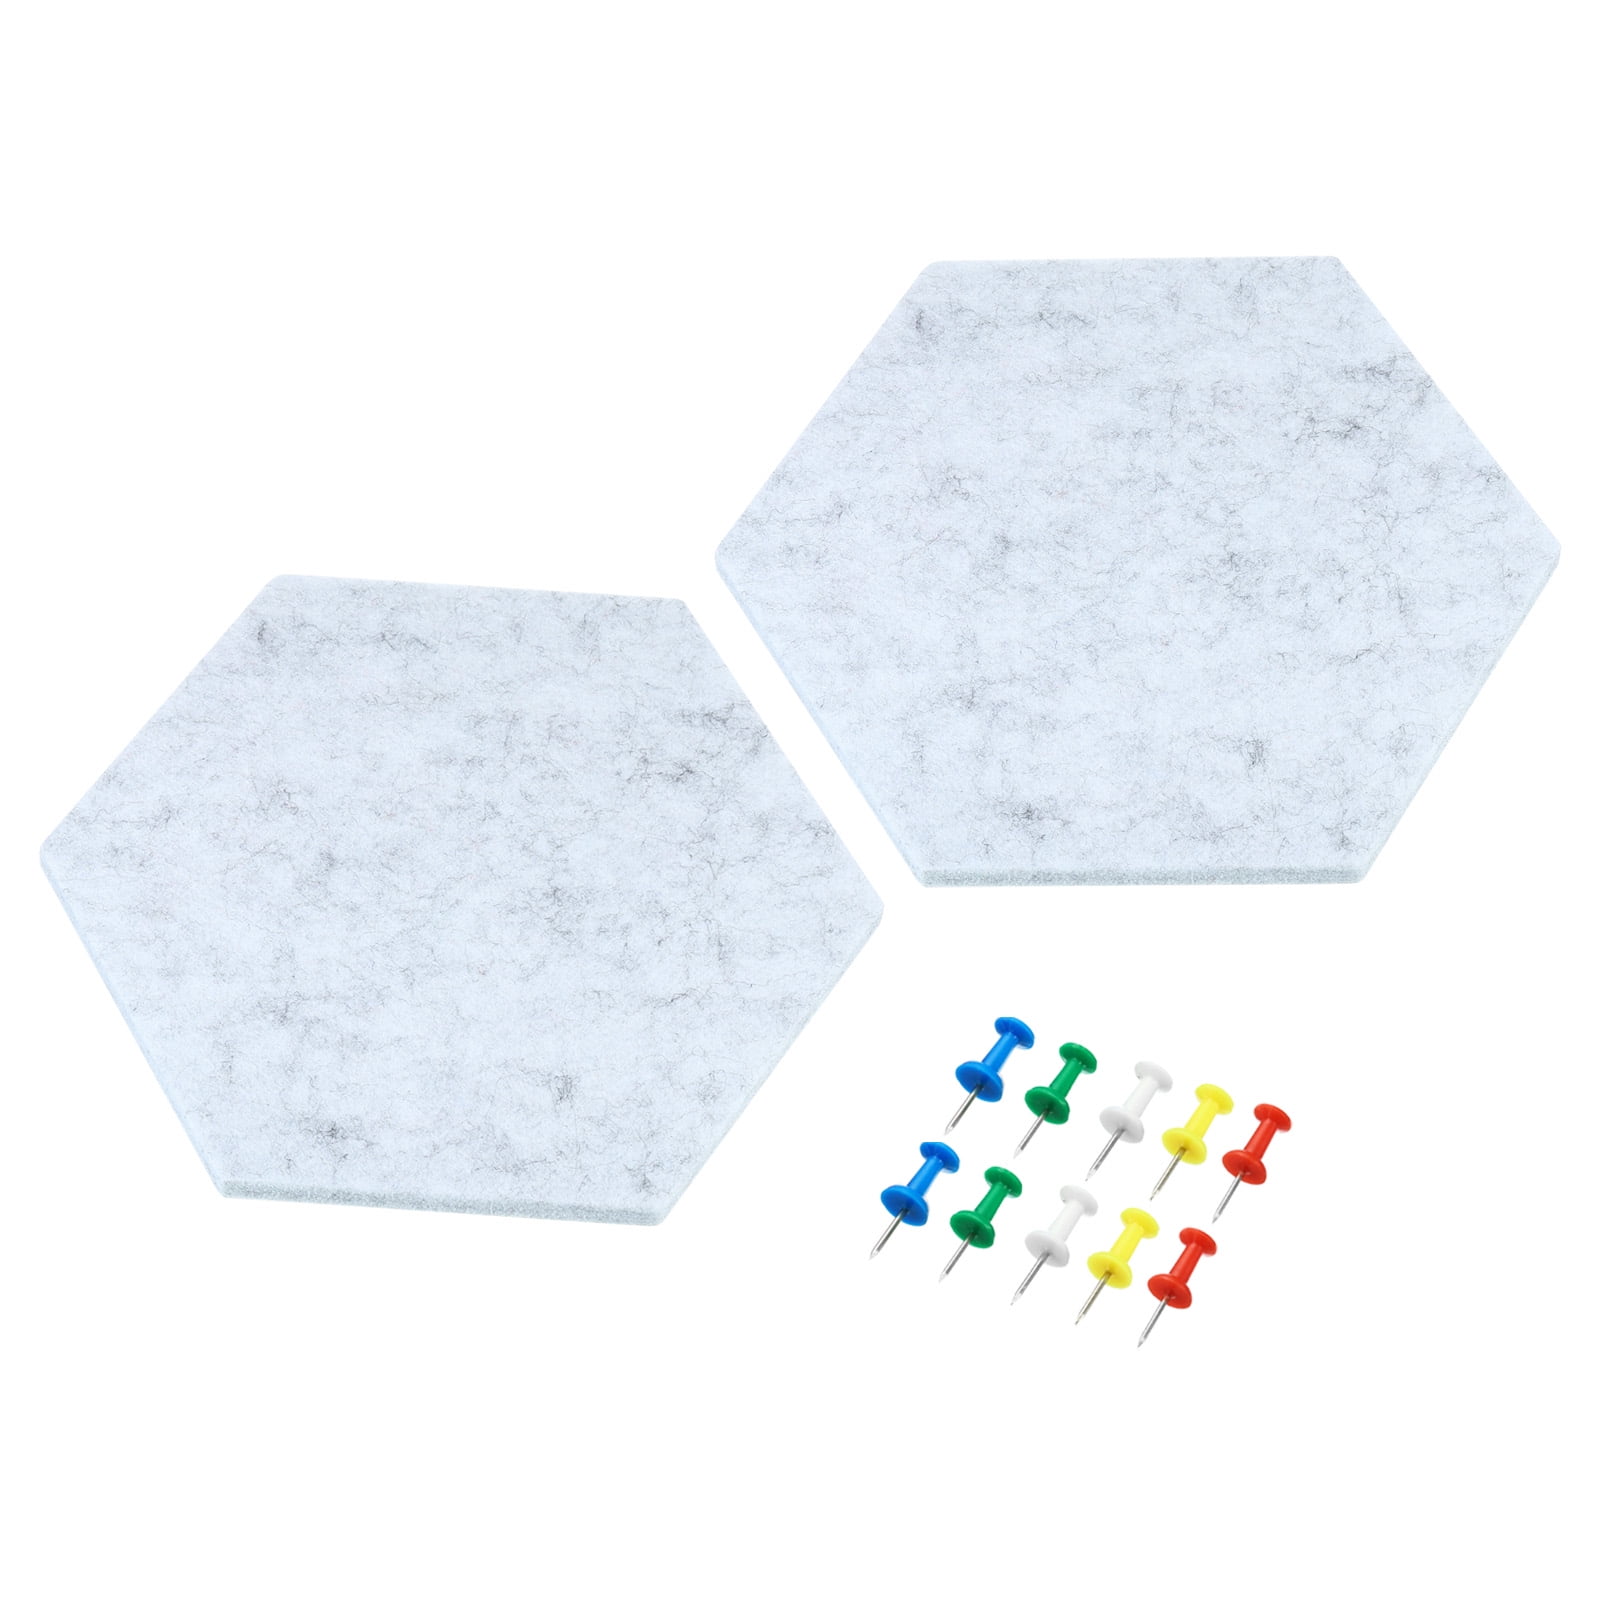 3 Pack Hexagon Cork Board Tiles with Push Pins, Self-Adhesive Bulletin  Boards for Walls (Small, 7.9 in)